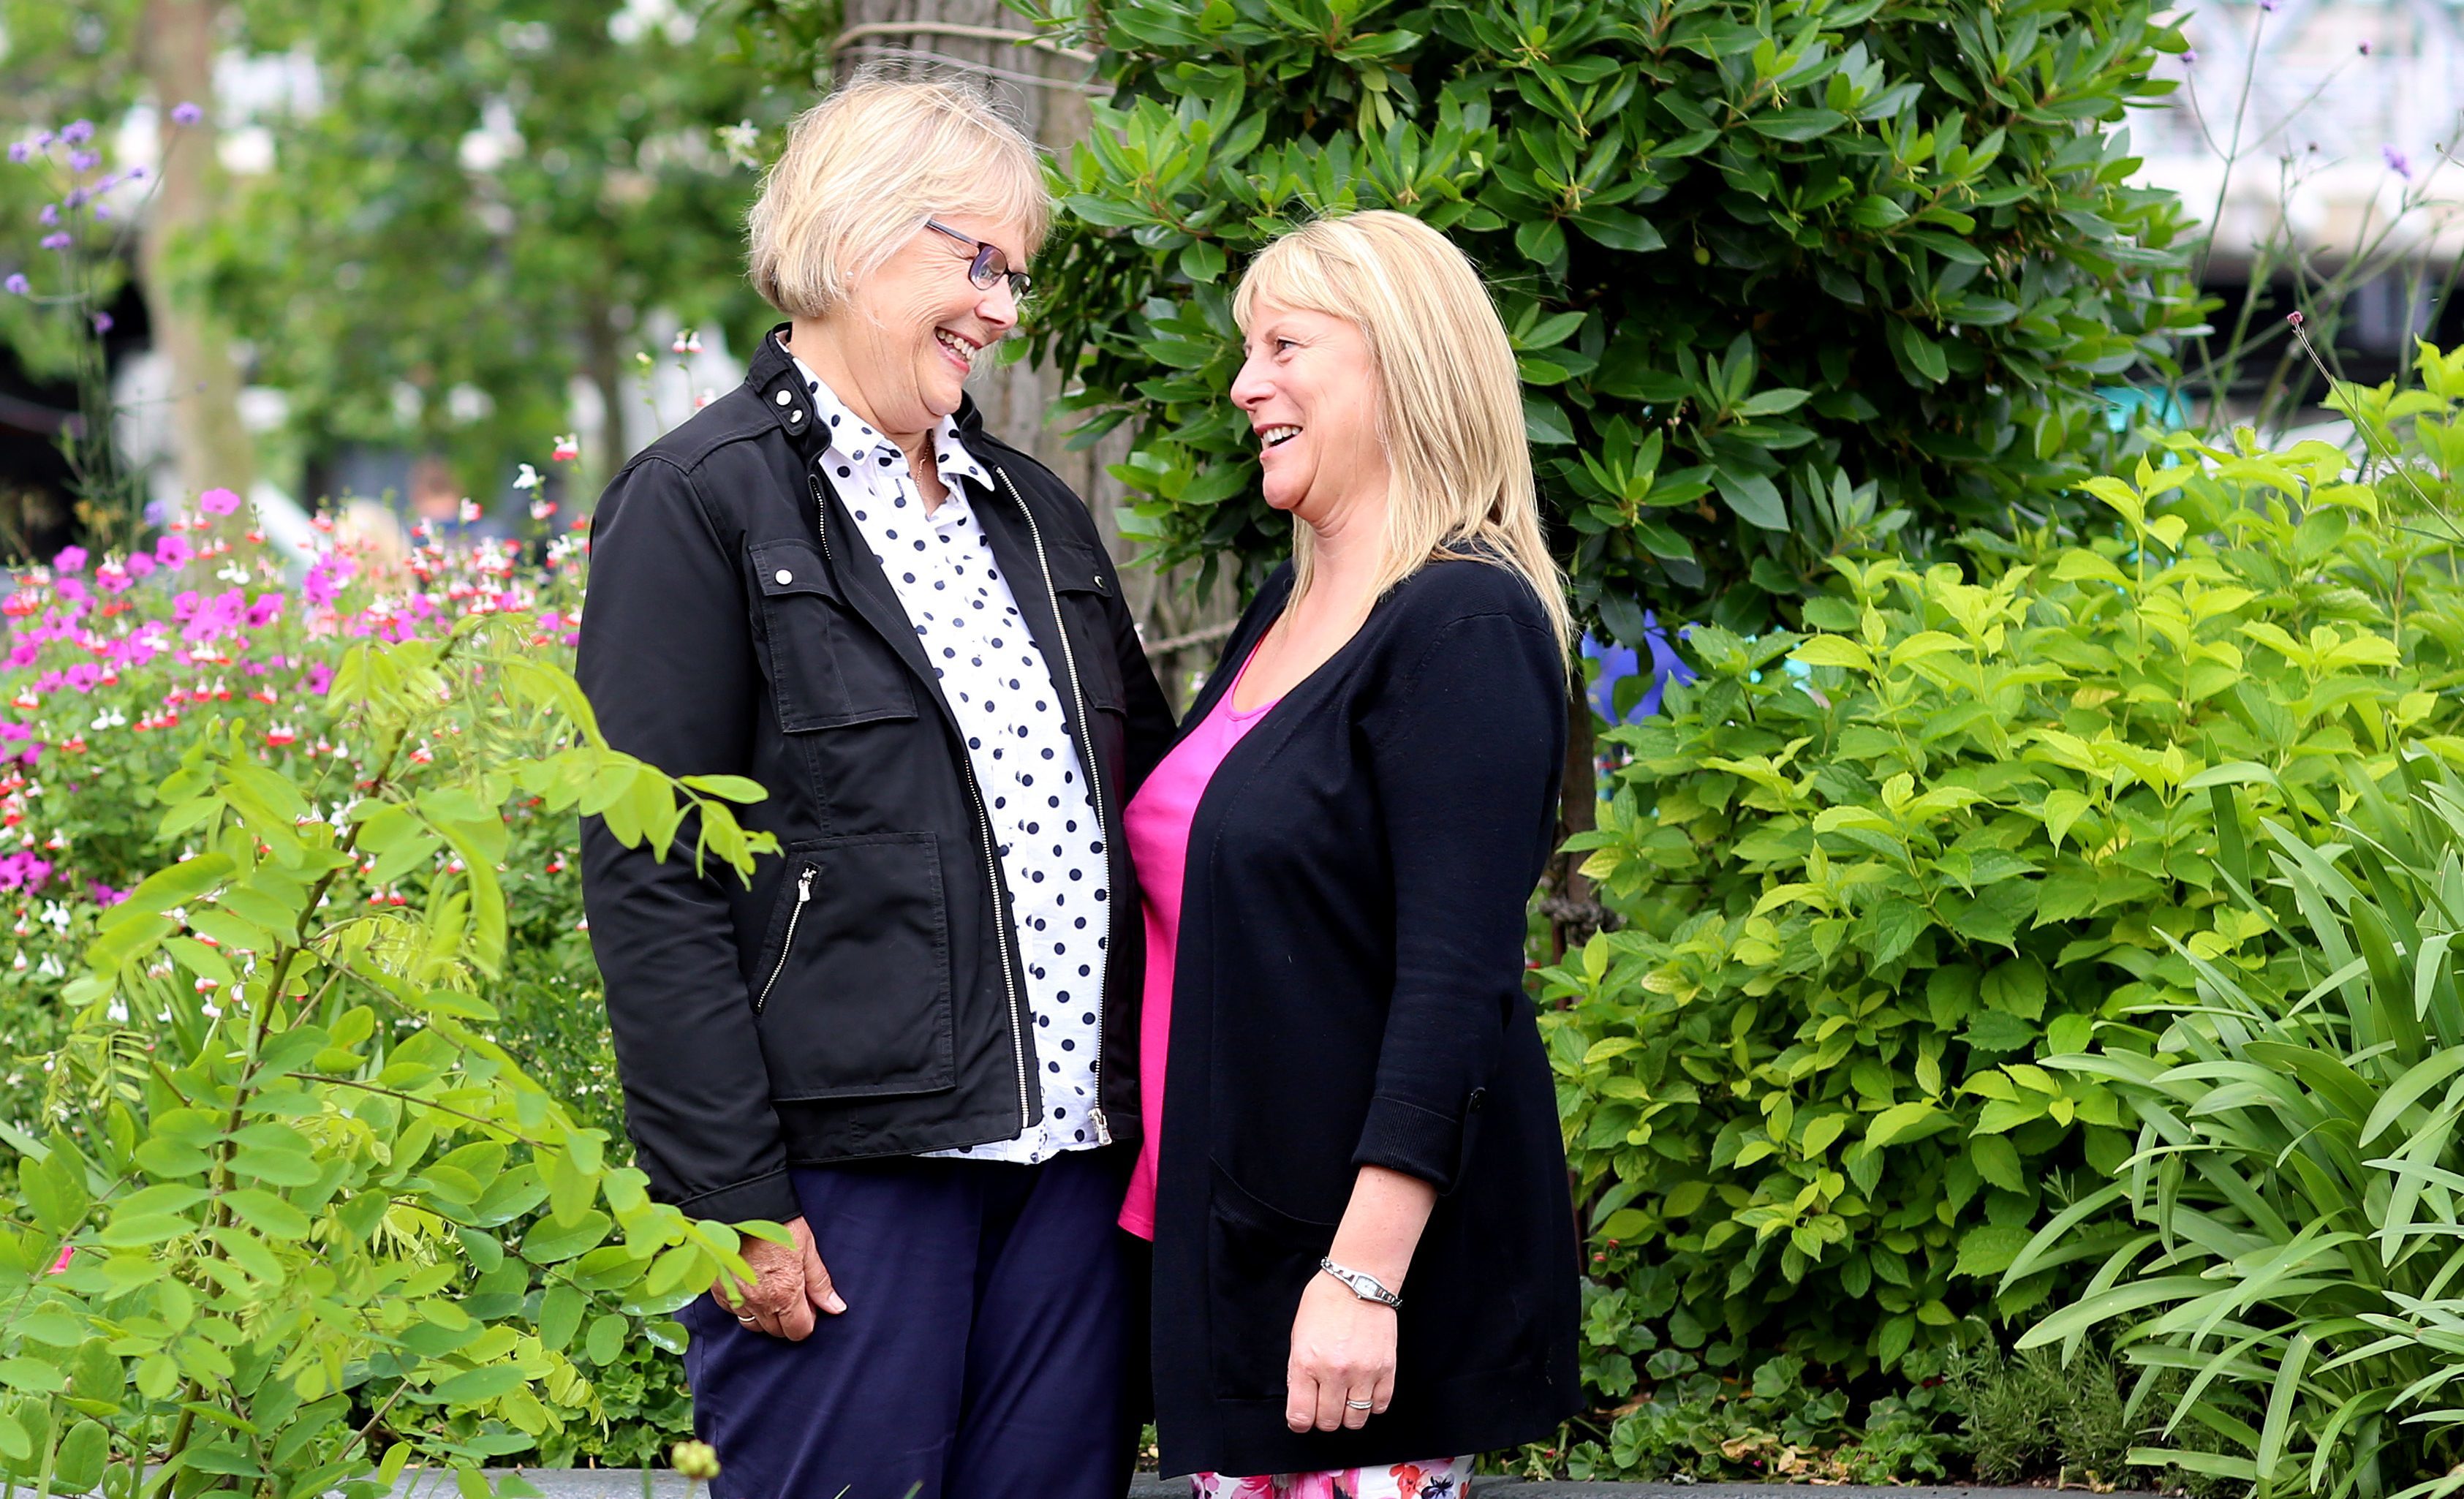 Julie Merrilees (right) who donated her stem cells, through the Anthony Nolan Trust, to Julie Rhoades (left) when she was diagnosed with leukemia seven years ago (Clara Molden for The Telegraph)